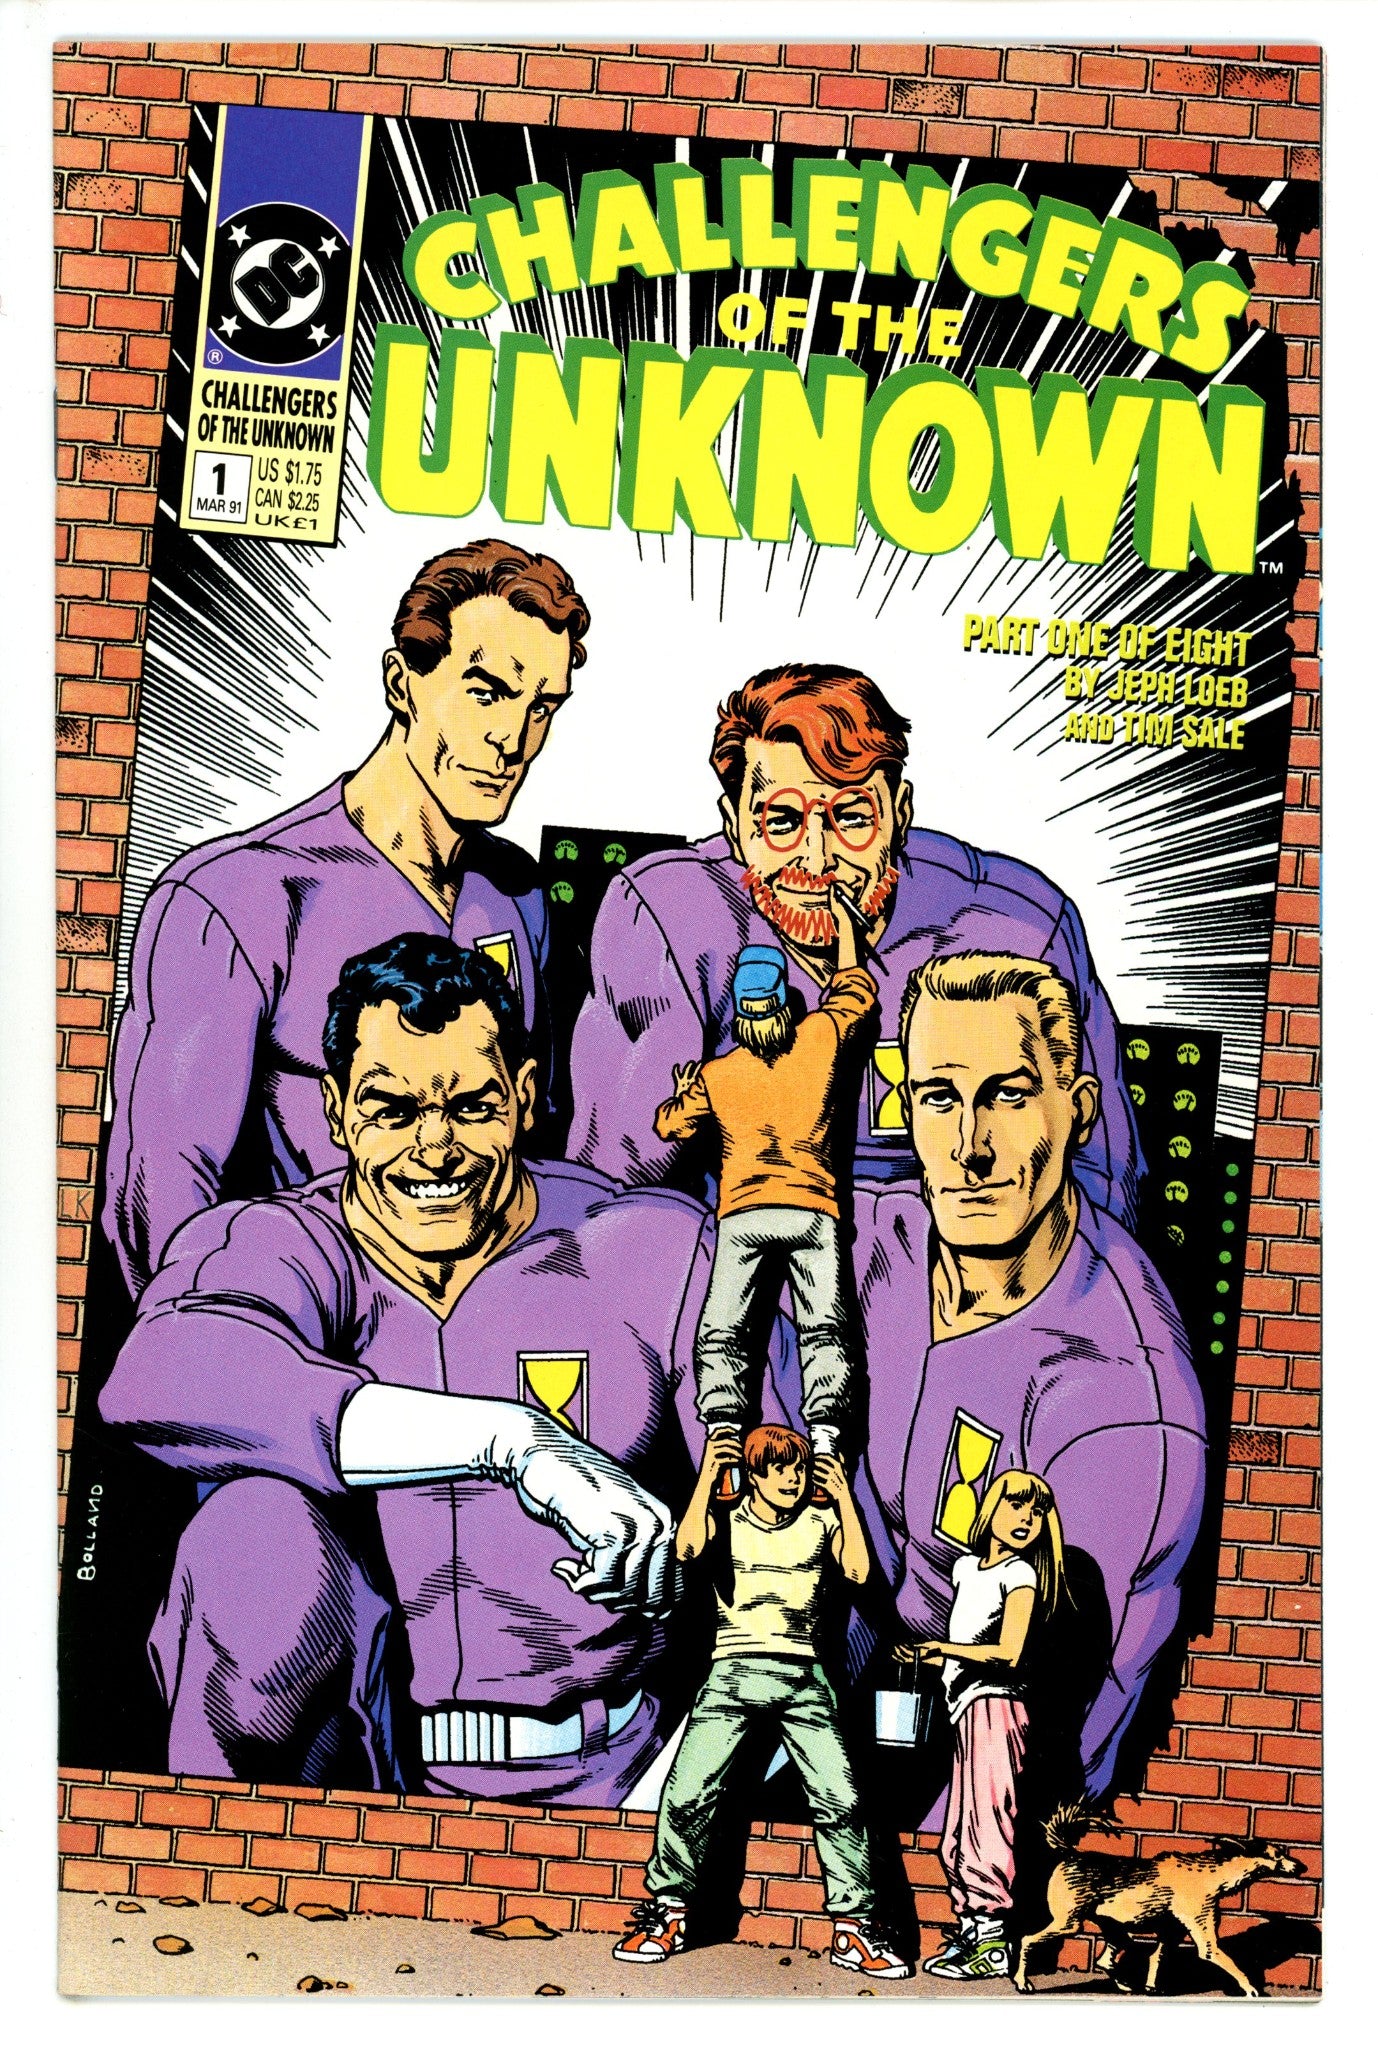 Challengers of the Unknown Vol 2 1 (1991)